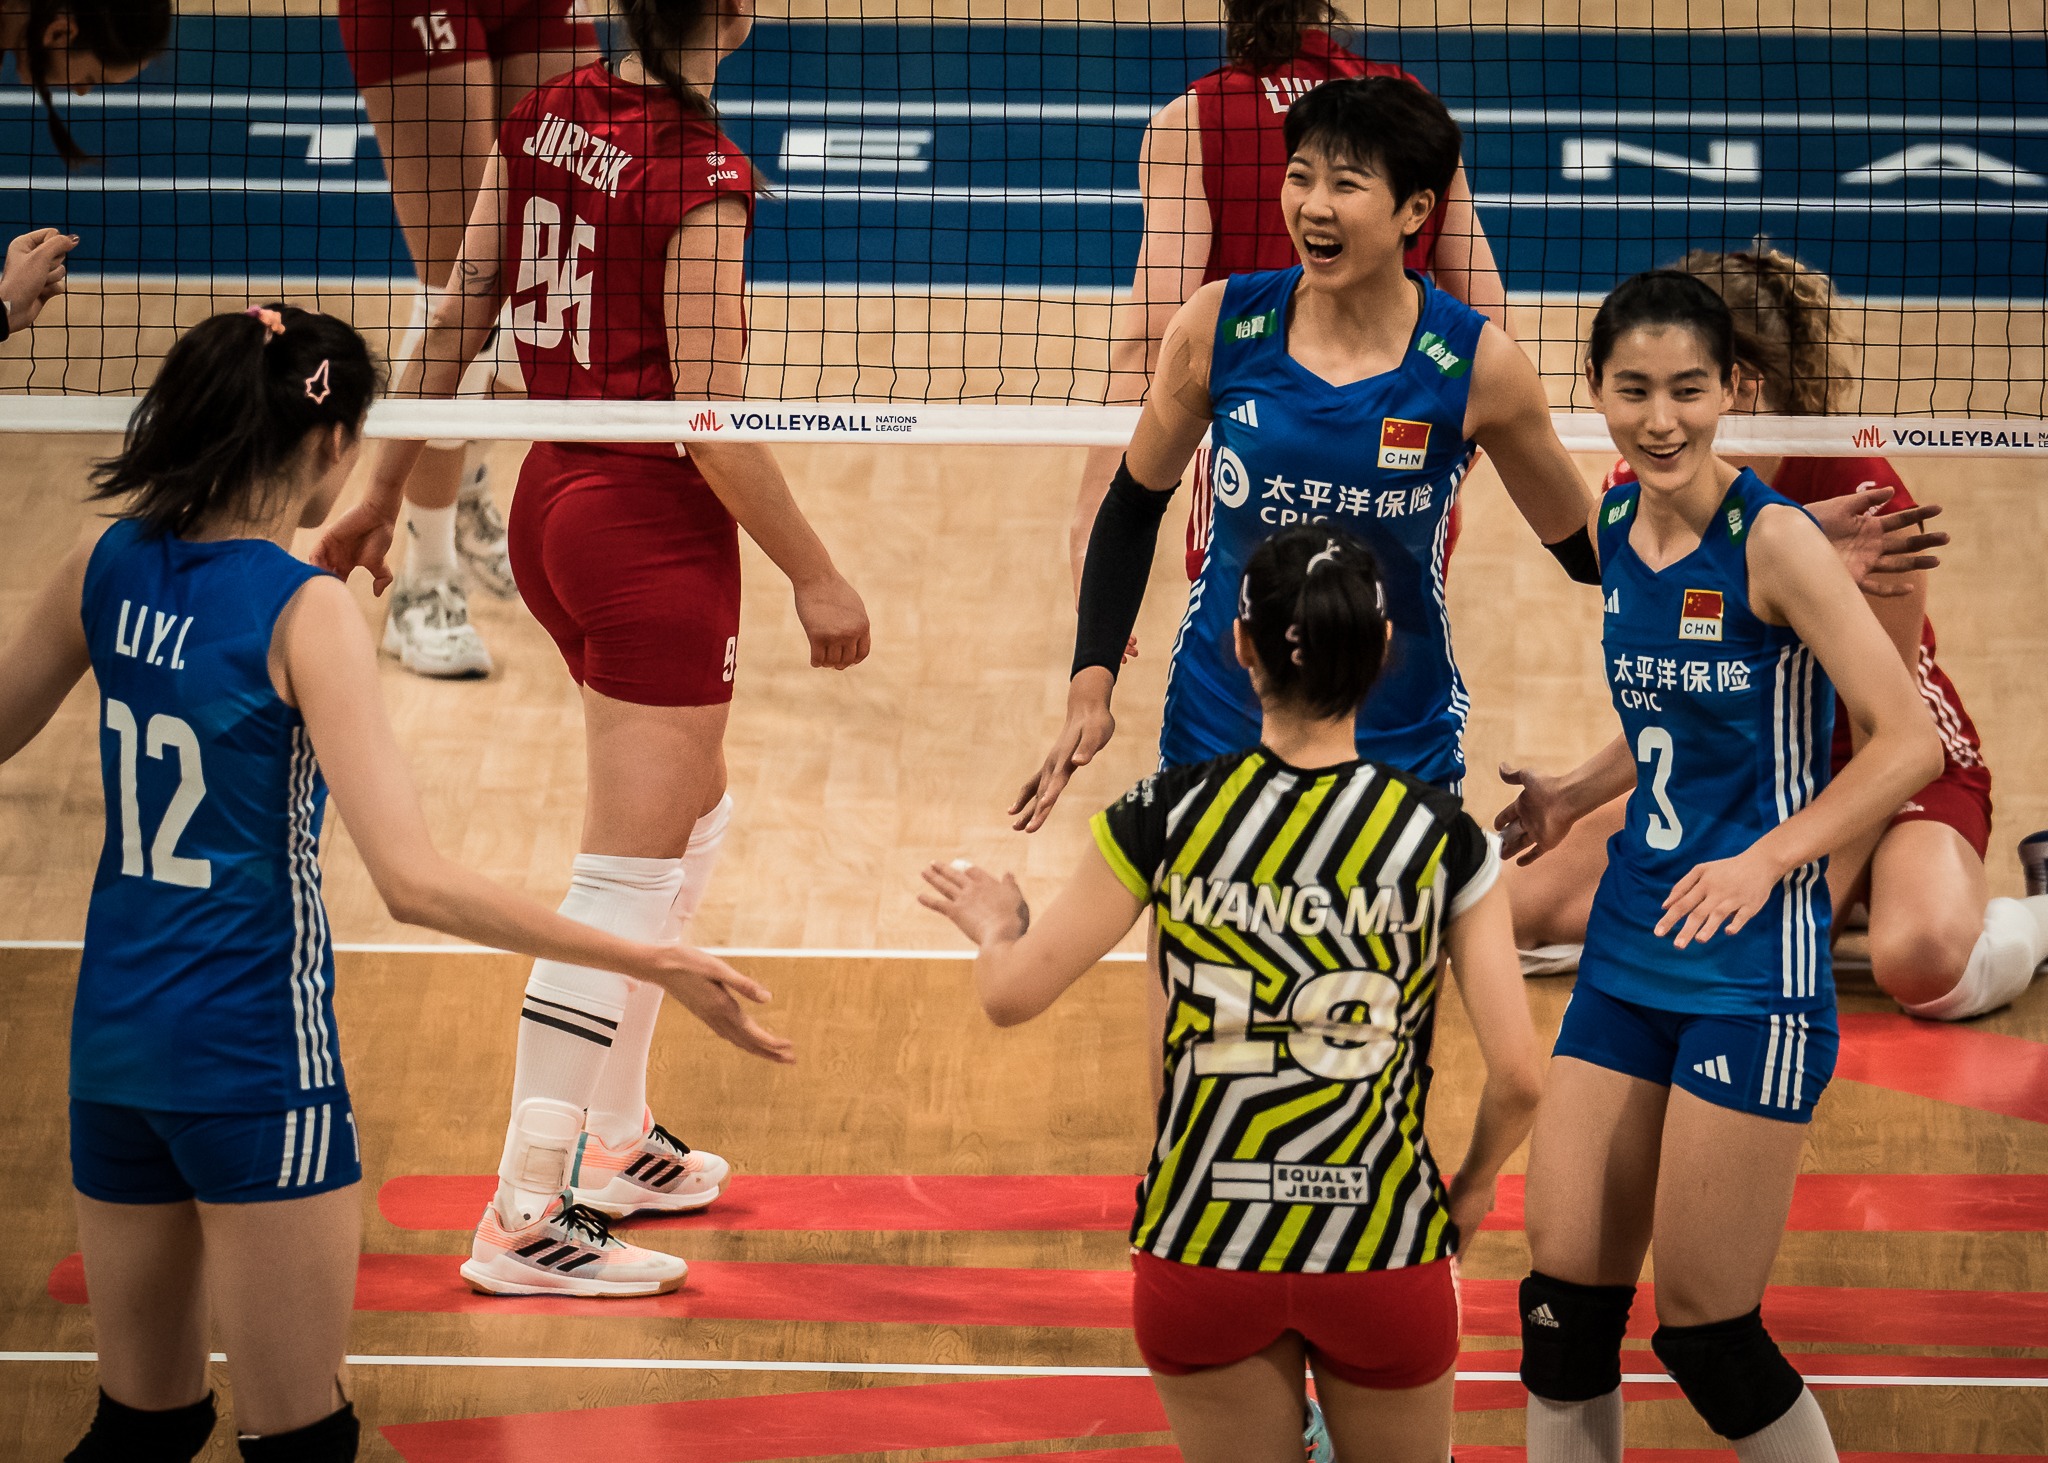 Brilliant China sweep Poland and advance to first VNL final volleyballworld